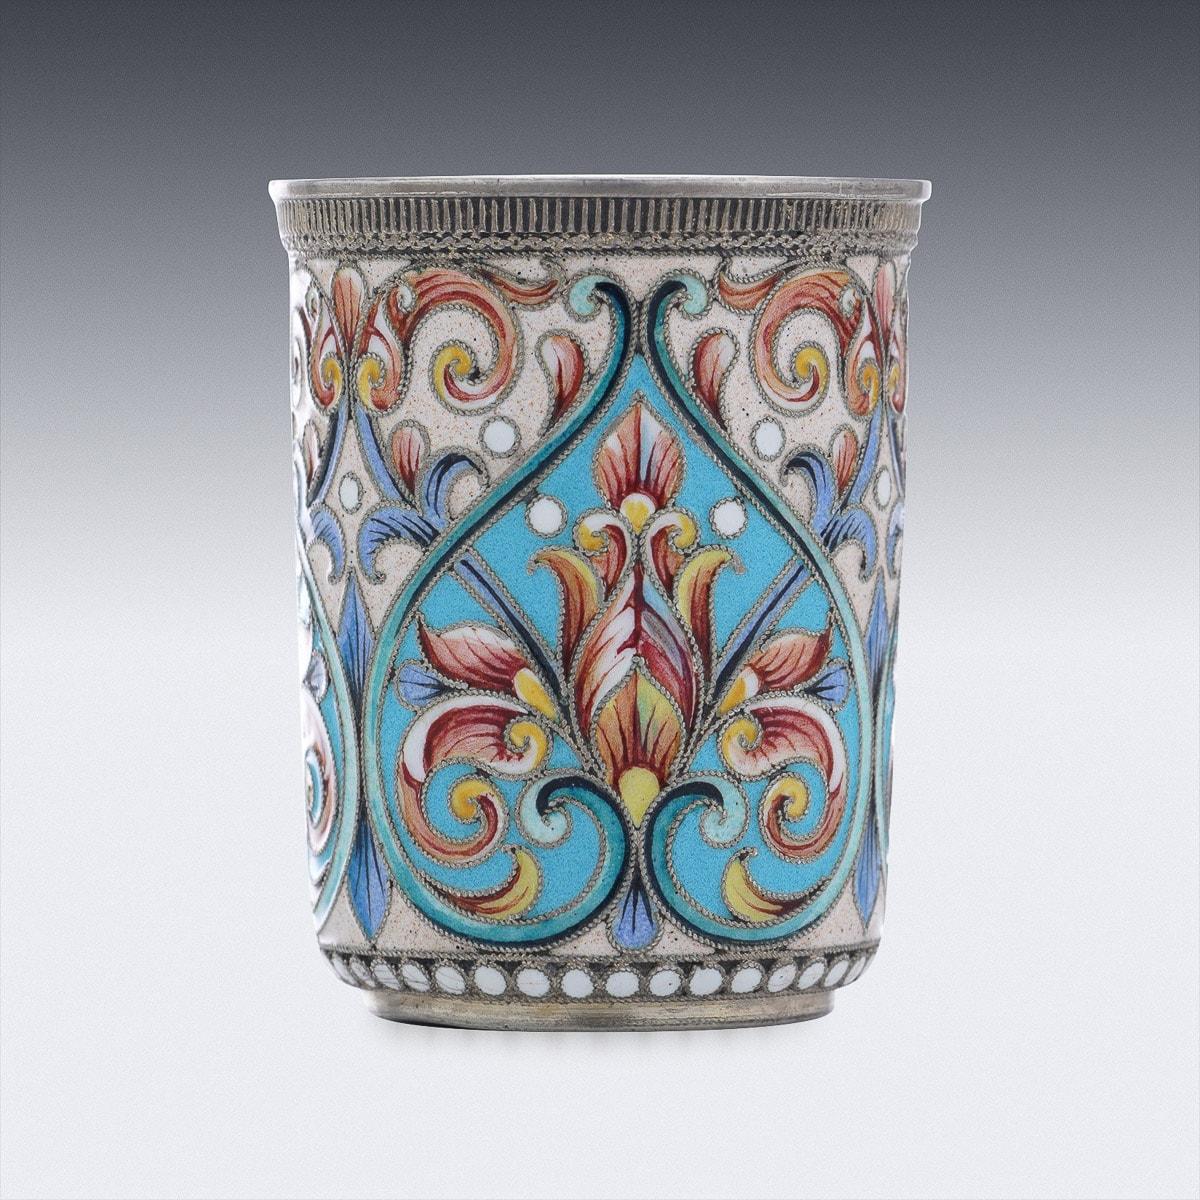 Antique early 20th Century Imperial Russian solid silver & cloisonne enamel beaker, designed upright with a flat base, the body profusely decorated with floral motifs in vary-coloured cloisonné enamel within beaded borders. Hallmarked Russian silver